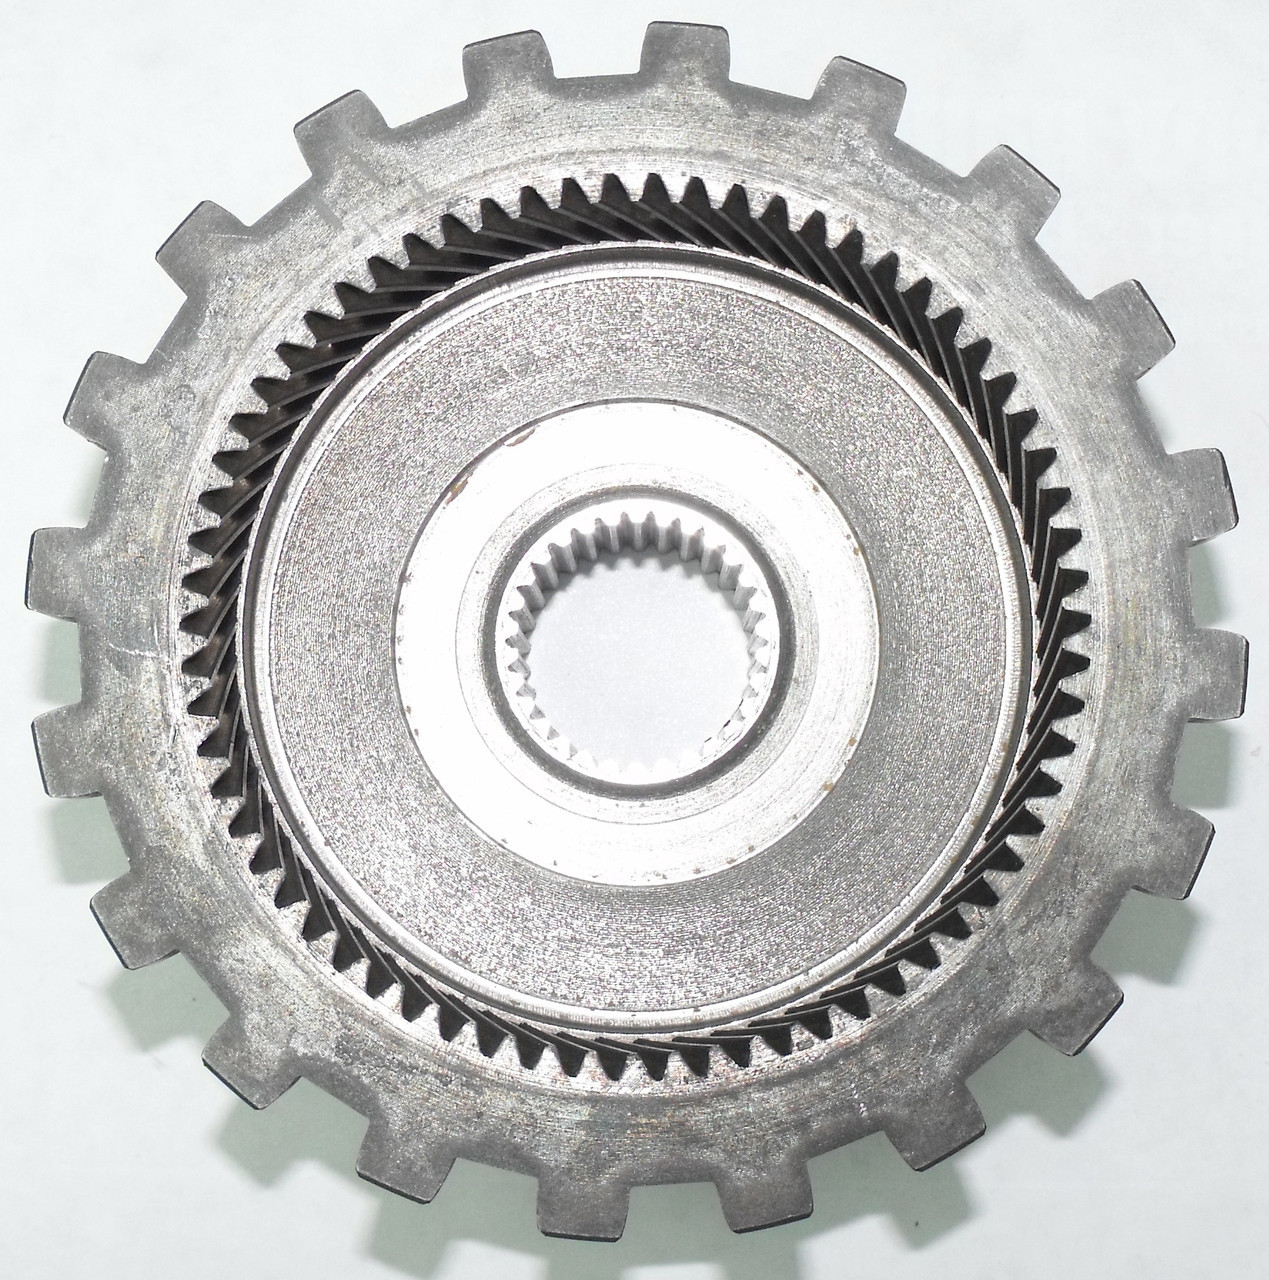 TH350 Rear Planet Ring Gear - Bearing Style (1969-1986)